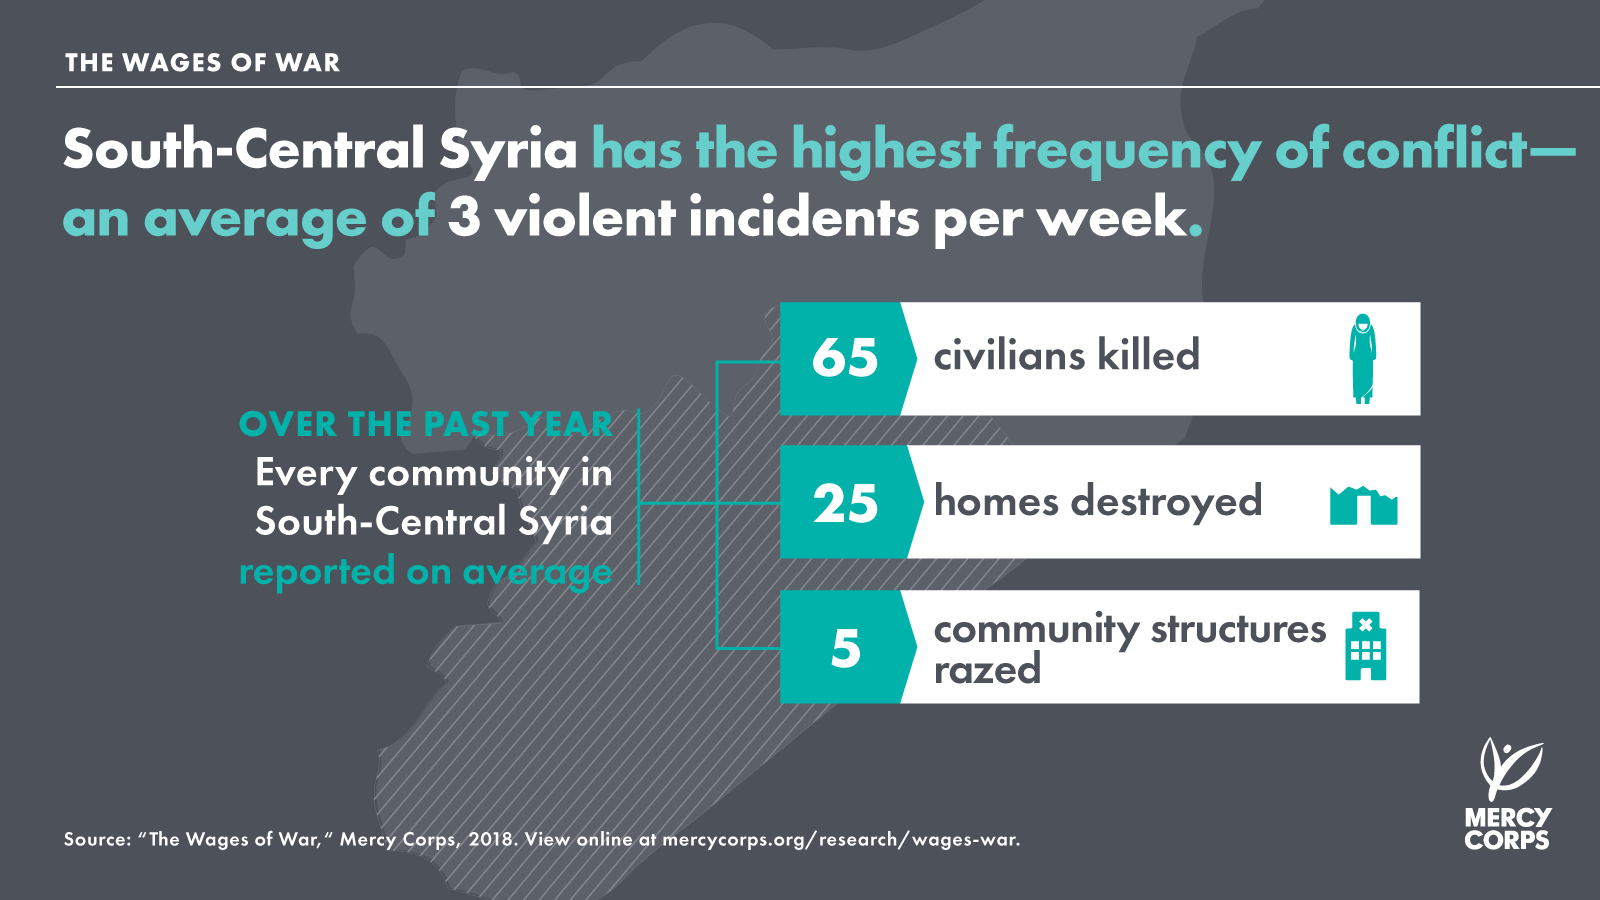 South-Central Syria has an average of 3 violent incidents per week